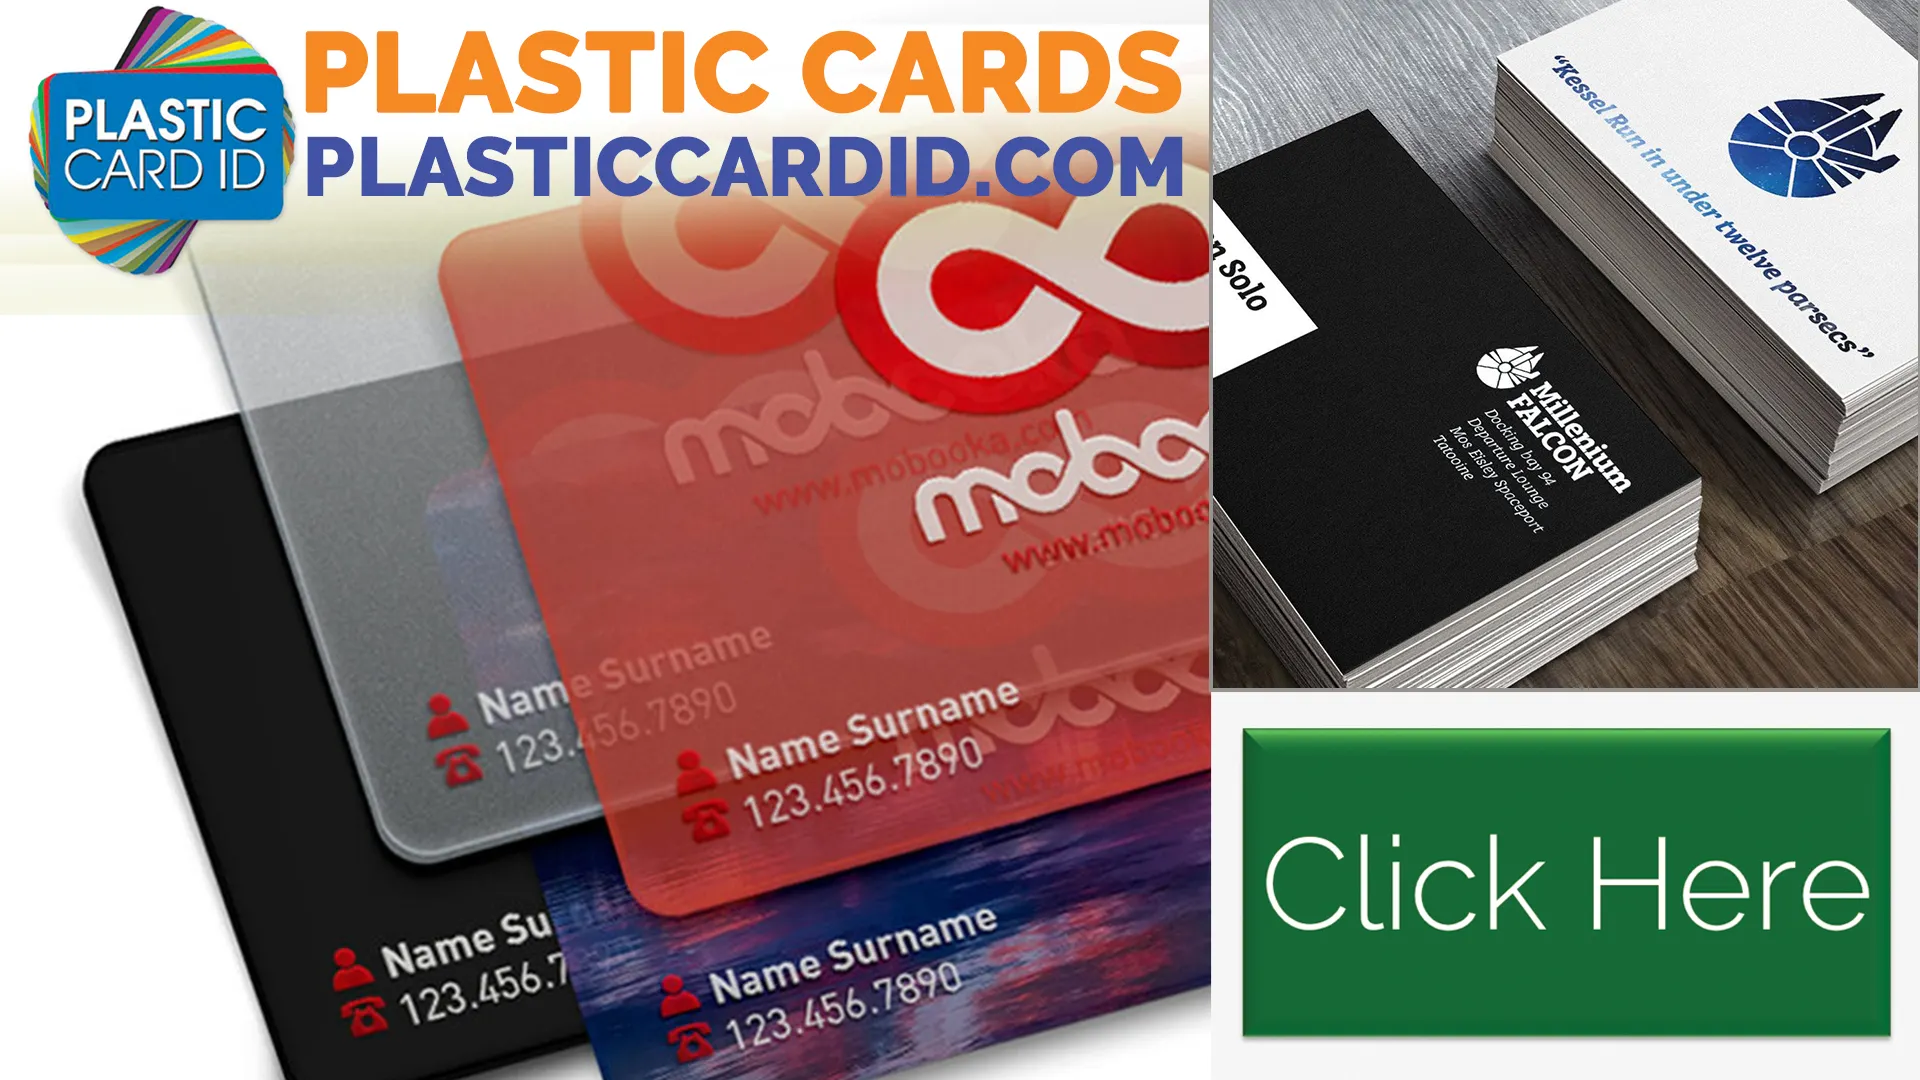 The Nationwide Reach of Plastic Card ID
